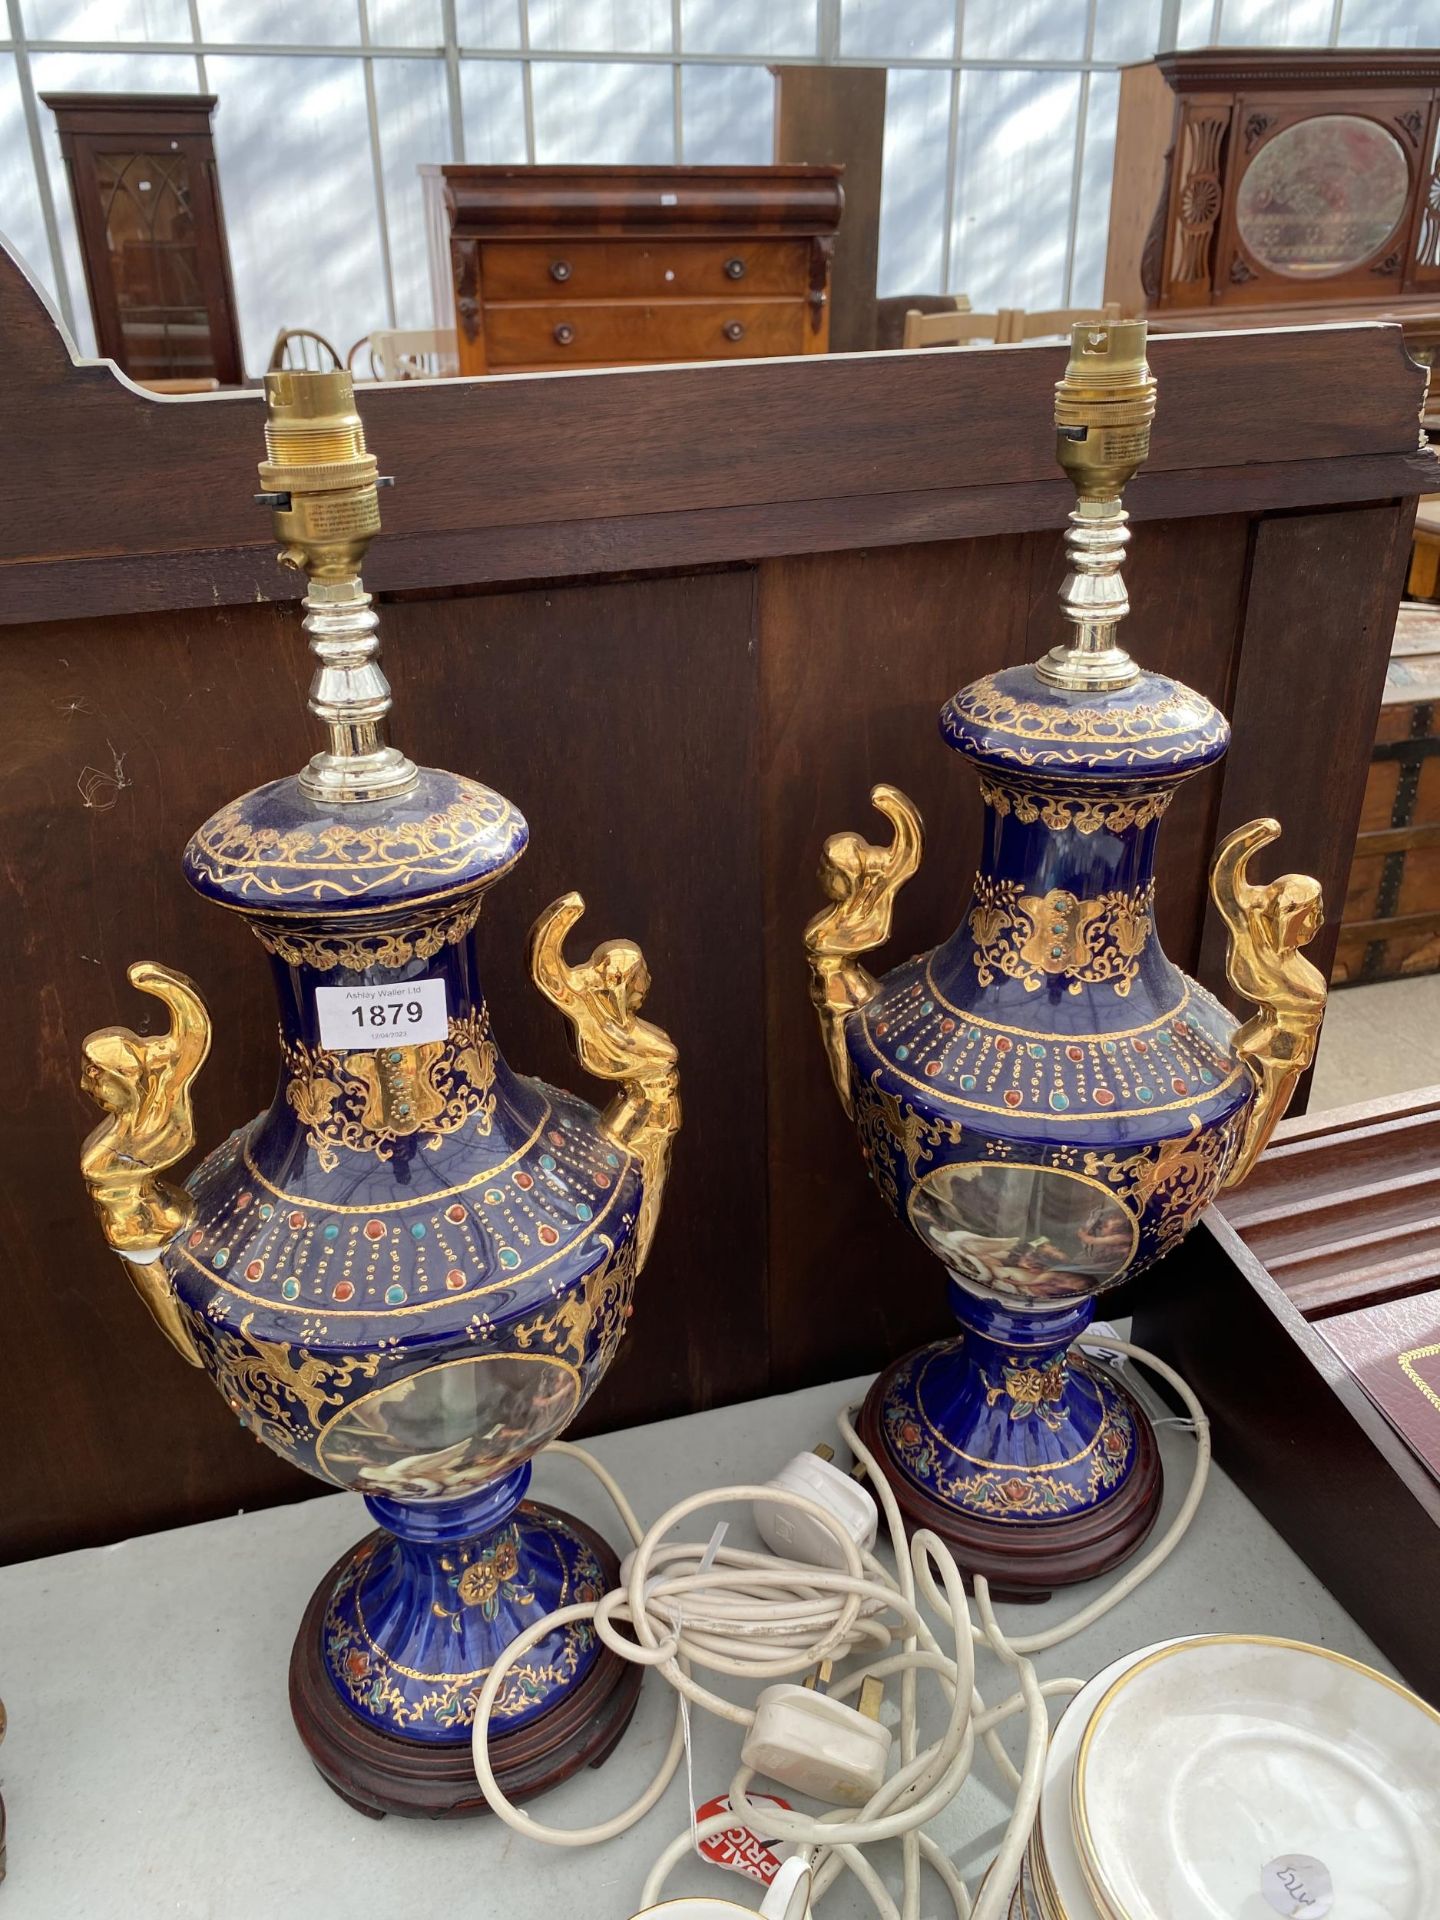 A PAIR OF BLUE CERAMIC ORIENTAL STYLE TABLE LAMPS WITH CHERUB DESIGN A/F